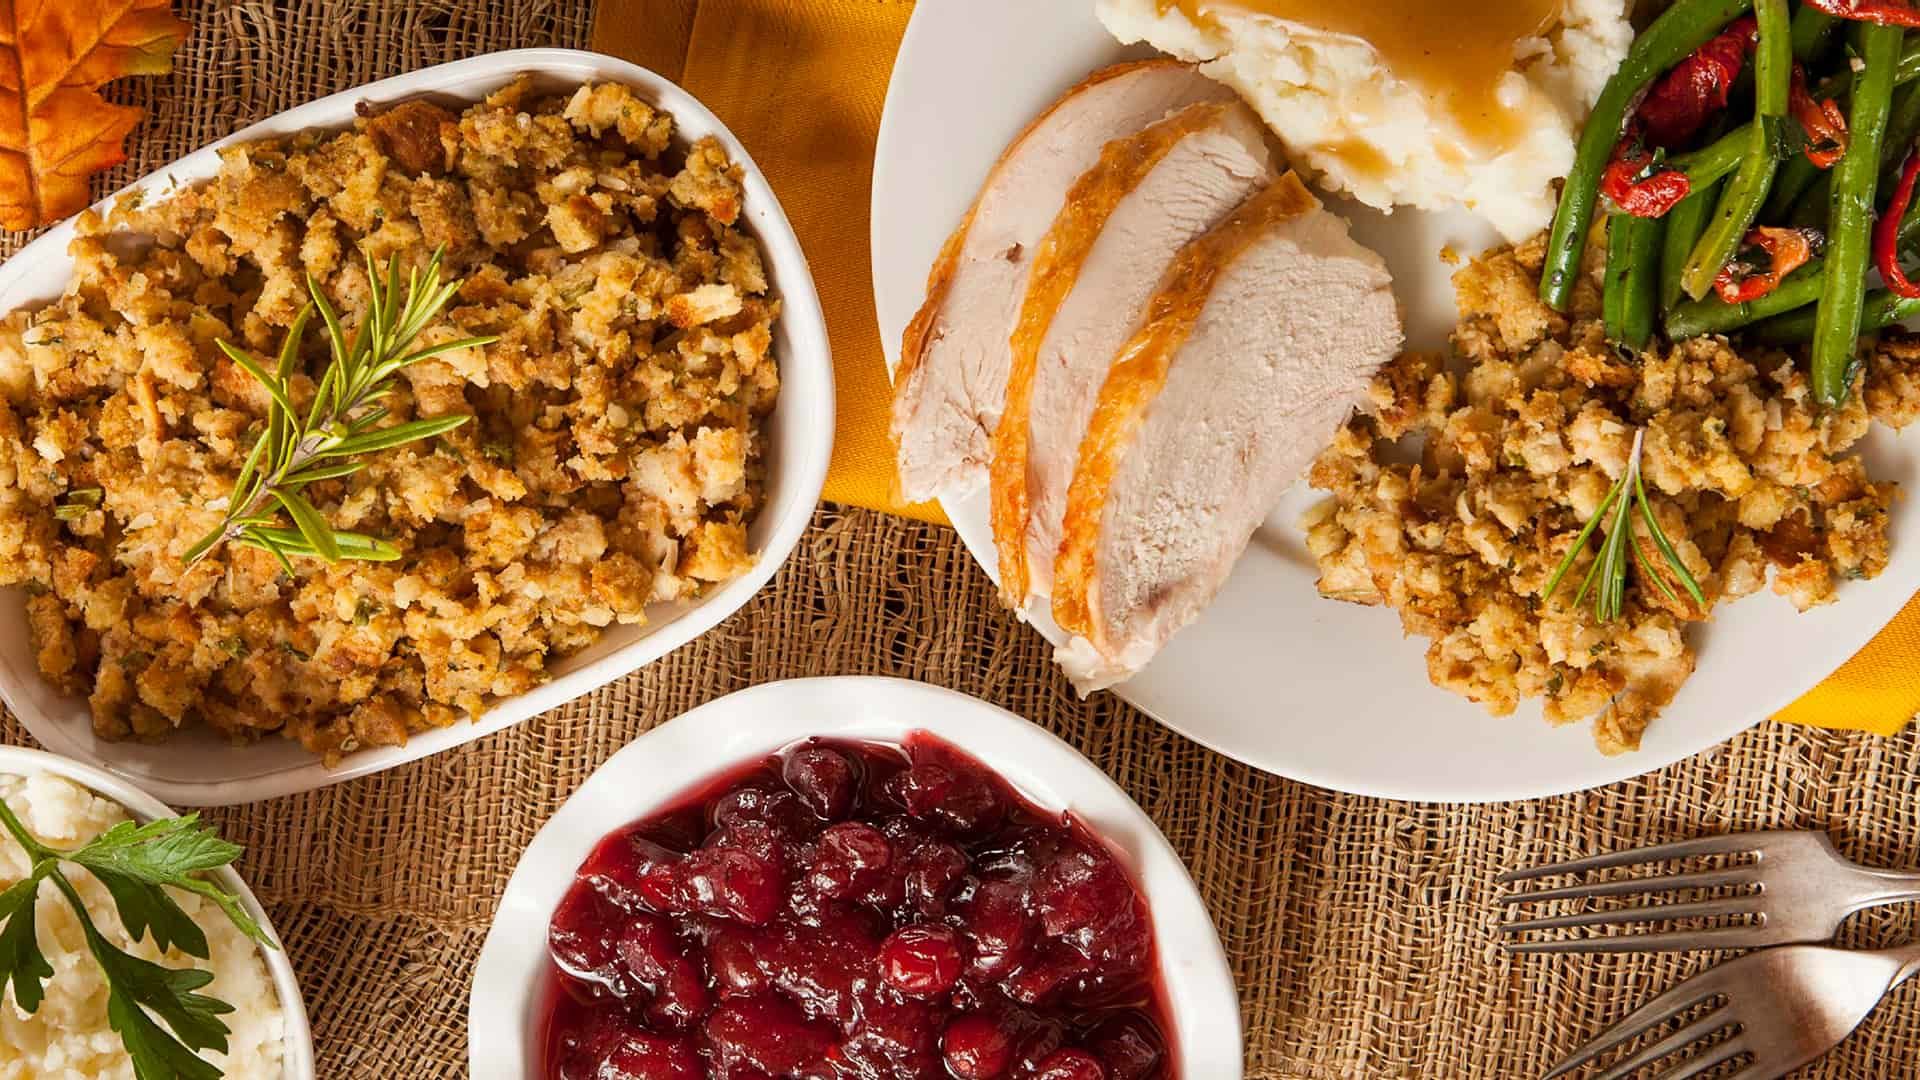 Spread of turkey, stuffing, and cranberry sauce for Thanksgiving